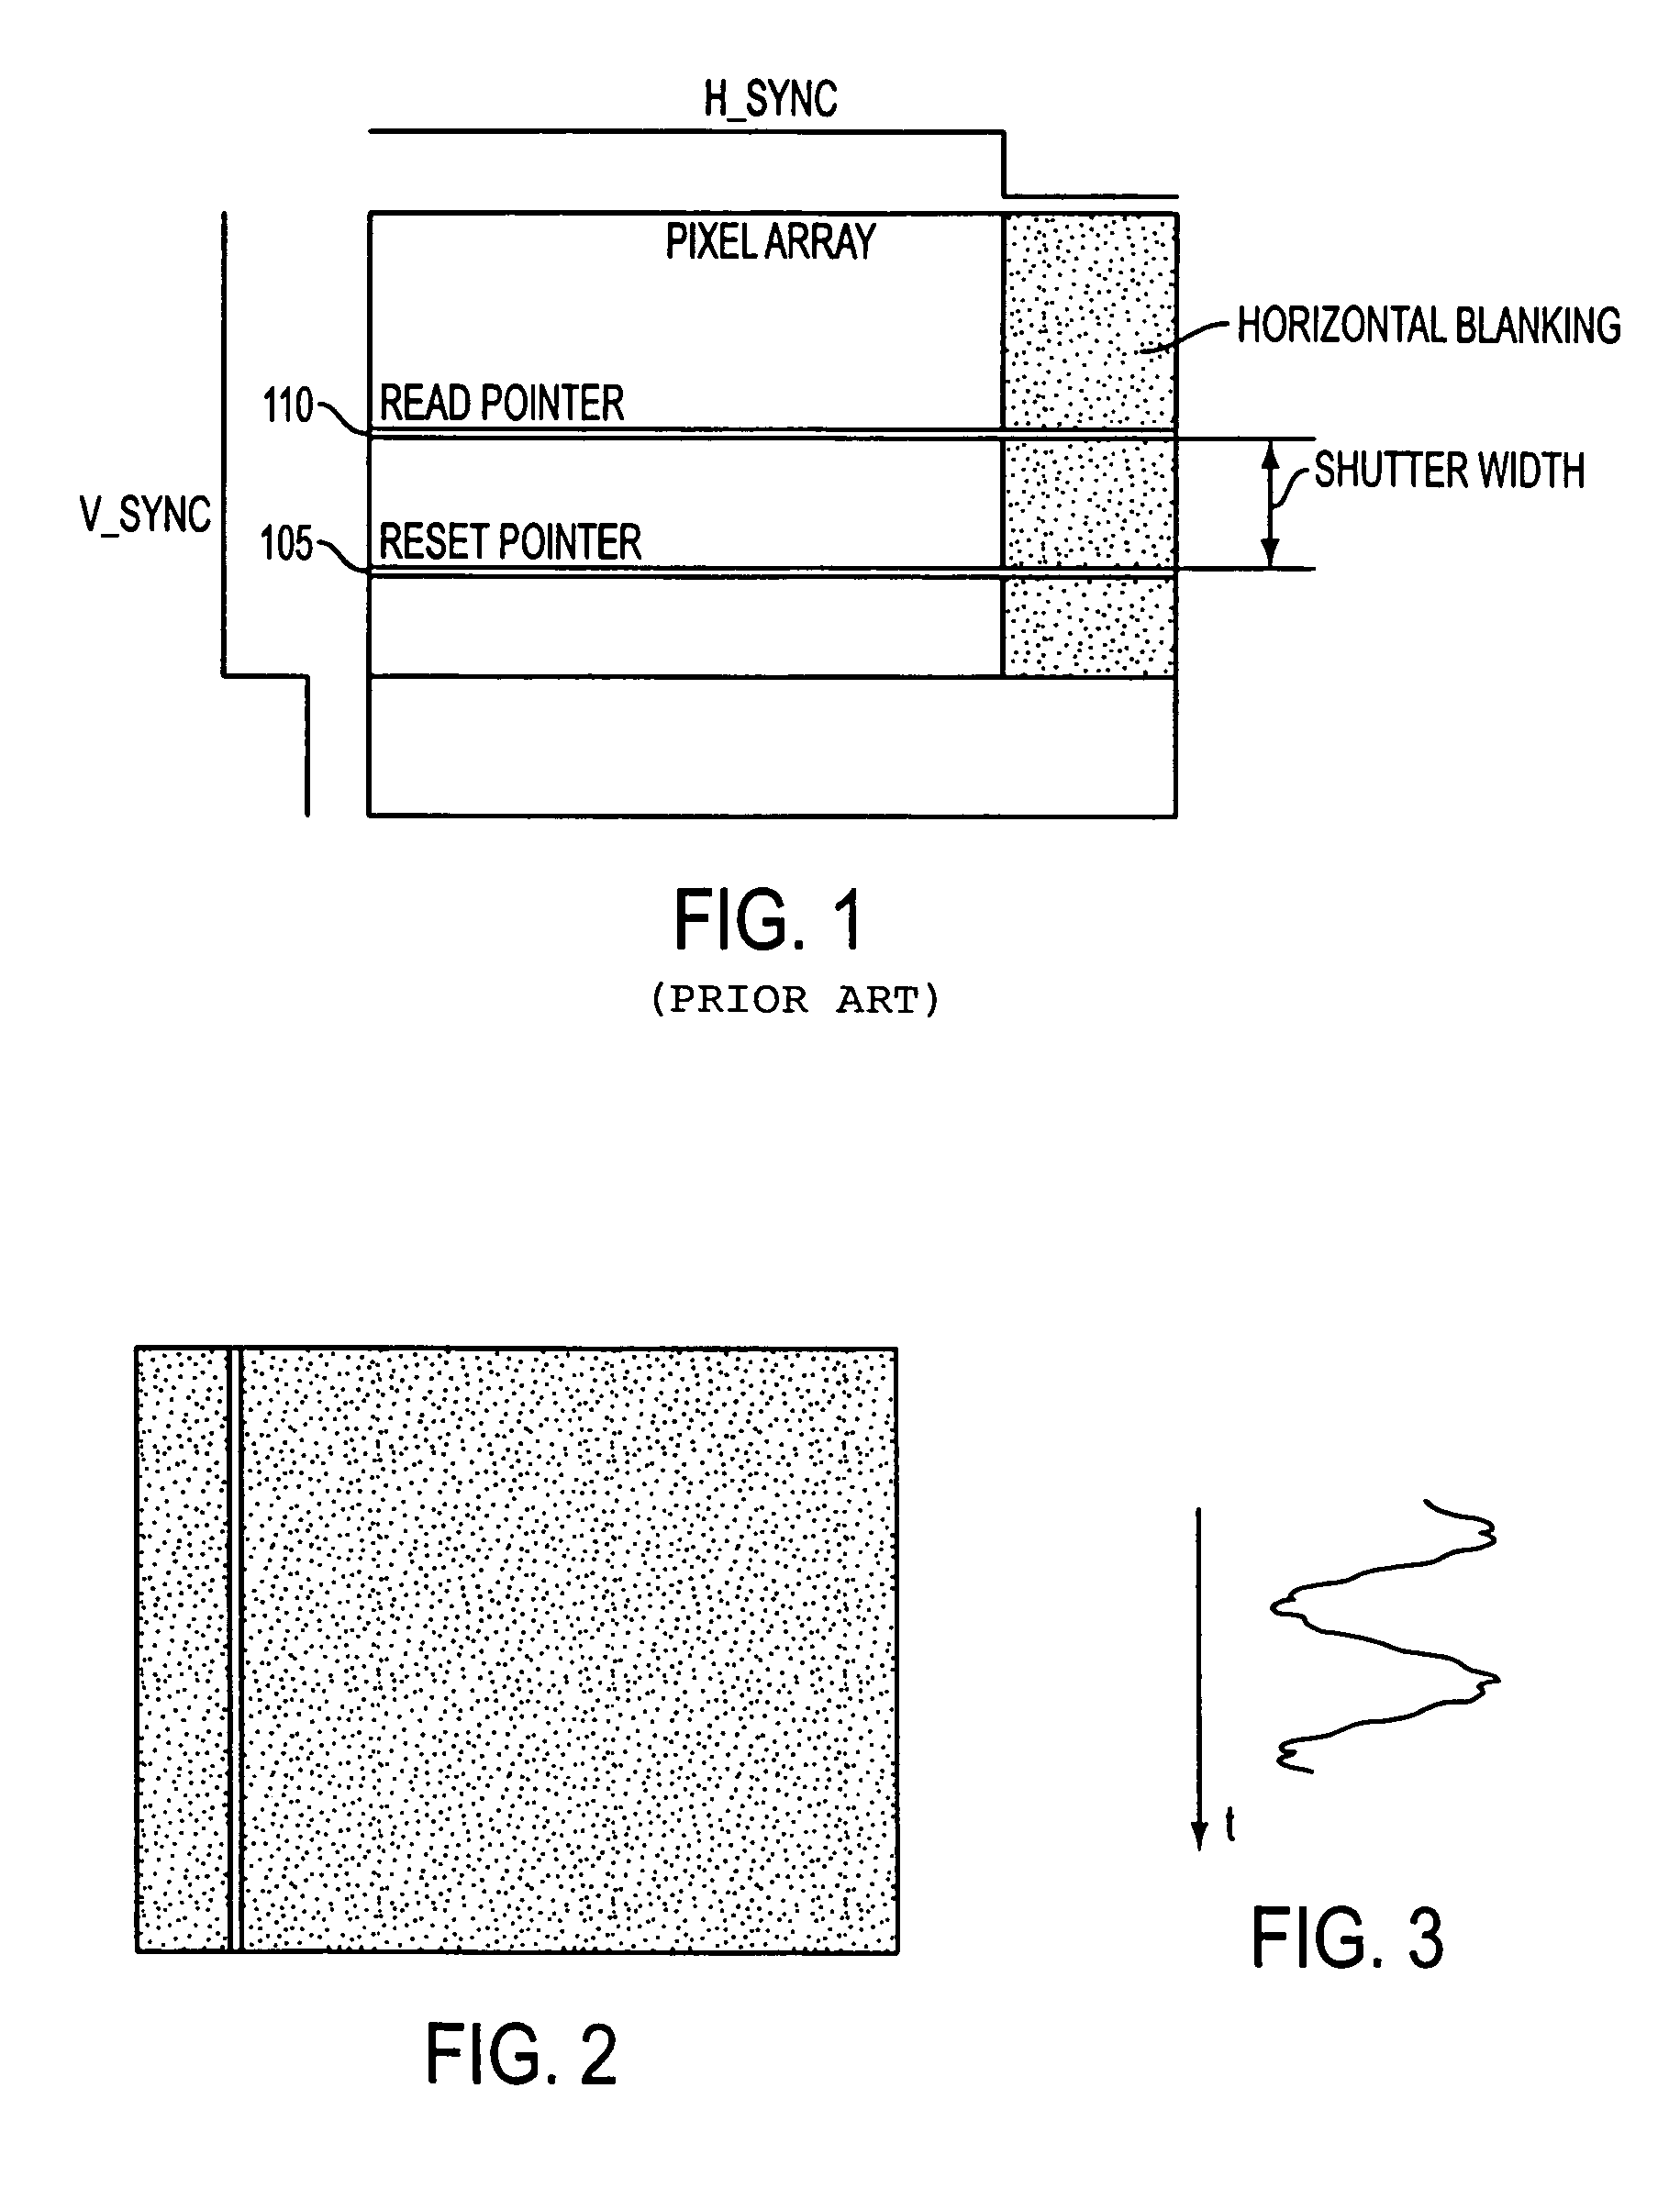 Method for mismatch detection between the frequency of illumination source and the duration of optical integration time for imager with rolling shutter